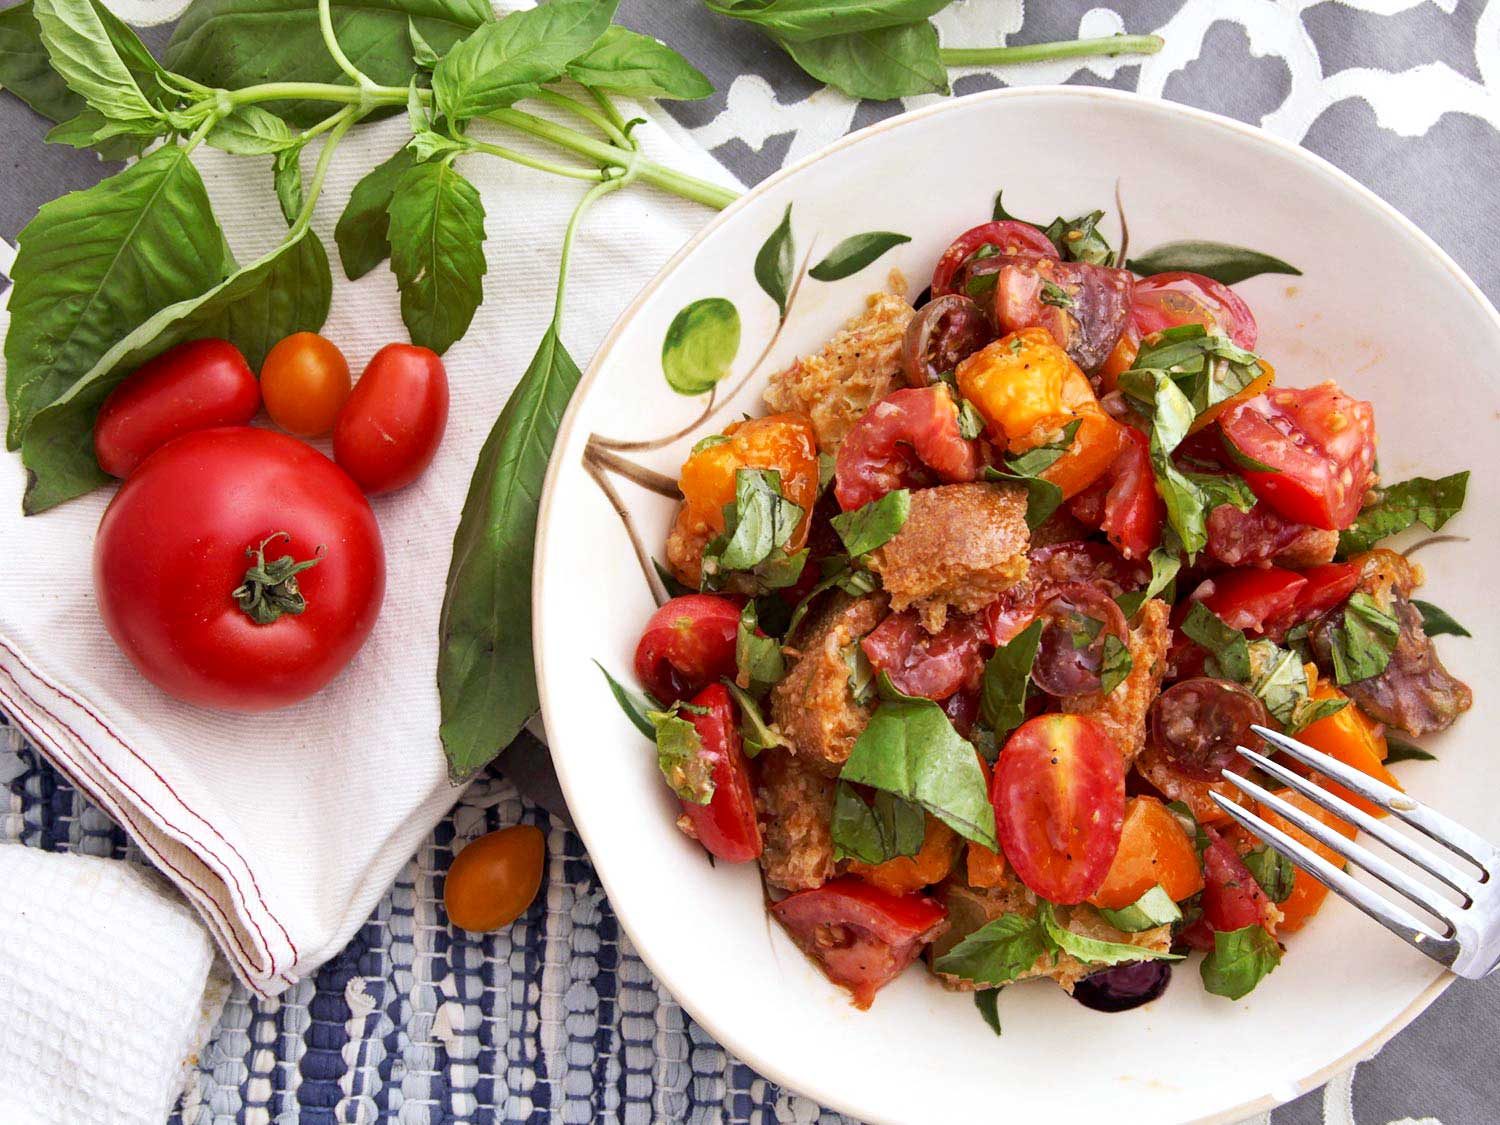 Eat Some Italian Food and We’ll Tell You Which Mediterranean City to Visit 9 panzanella